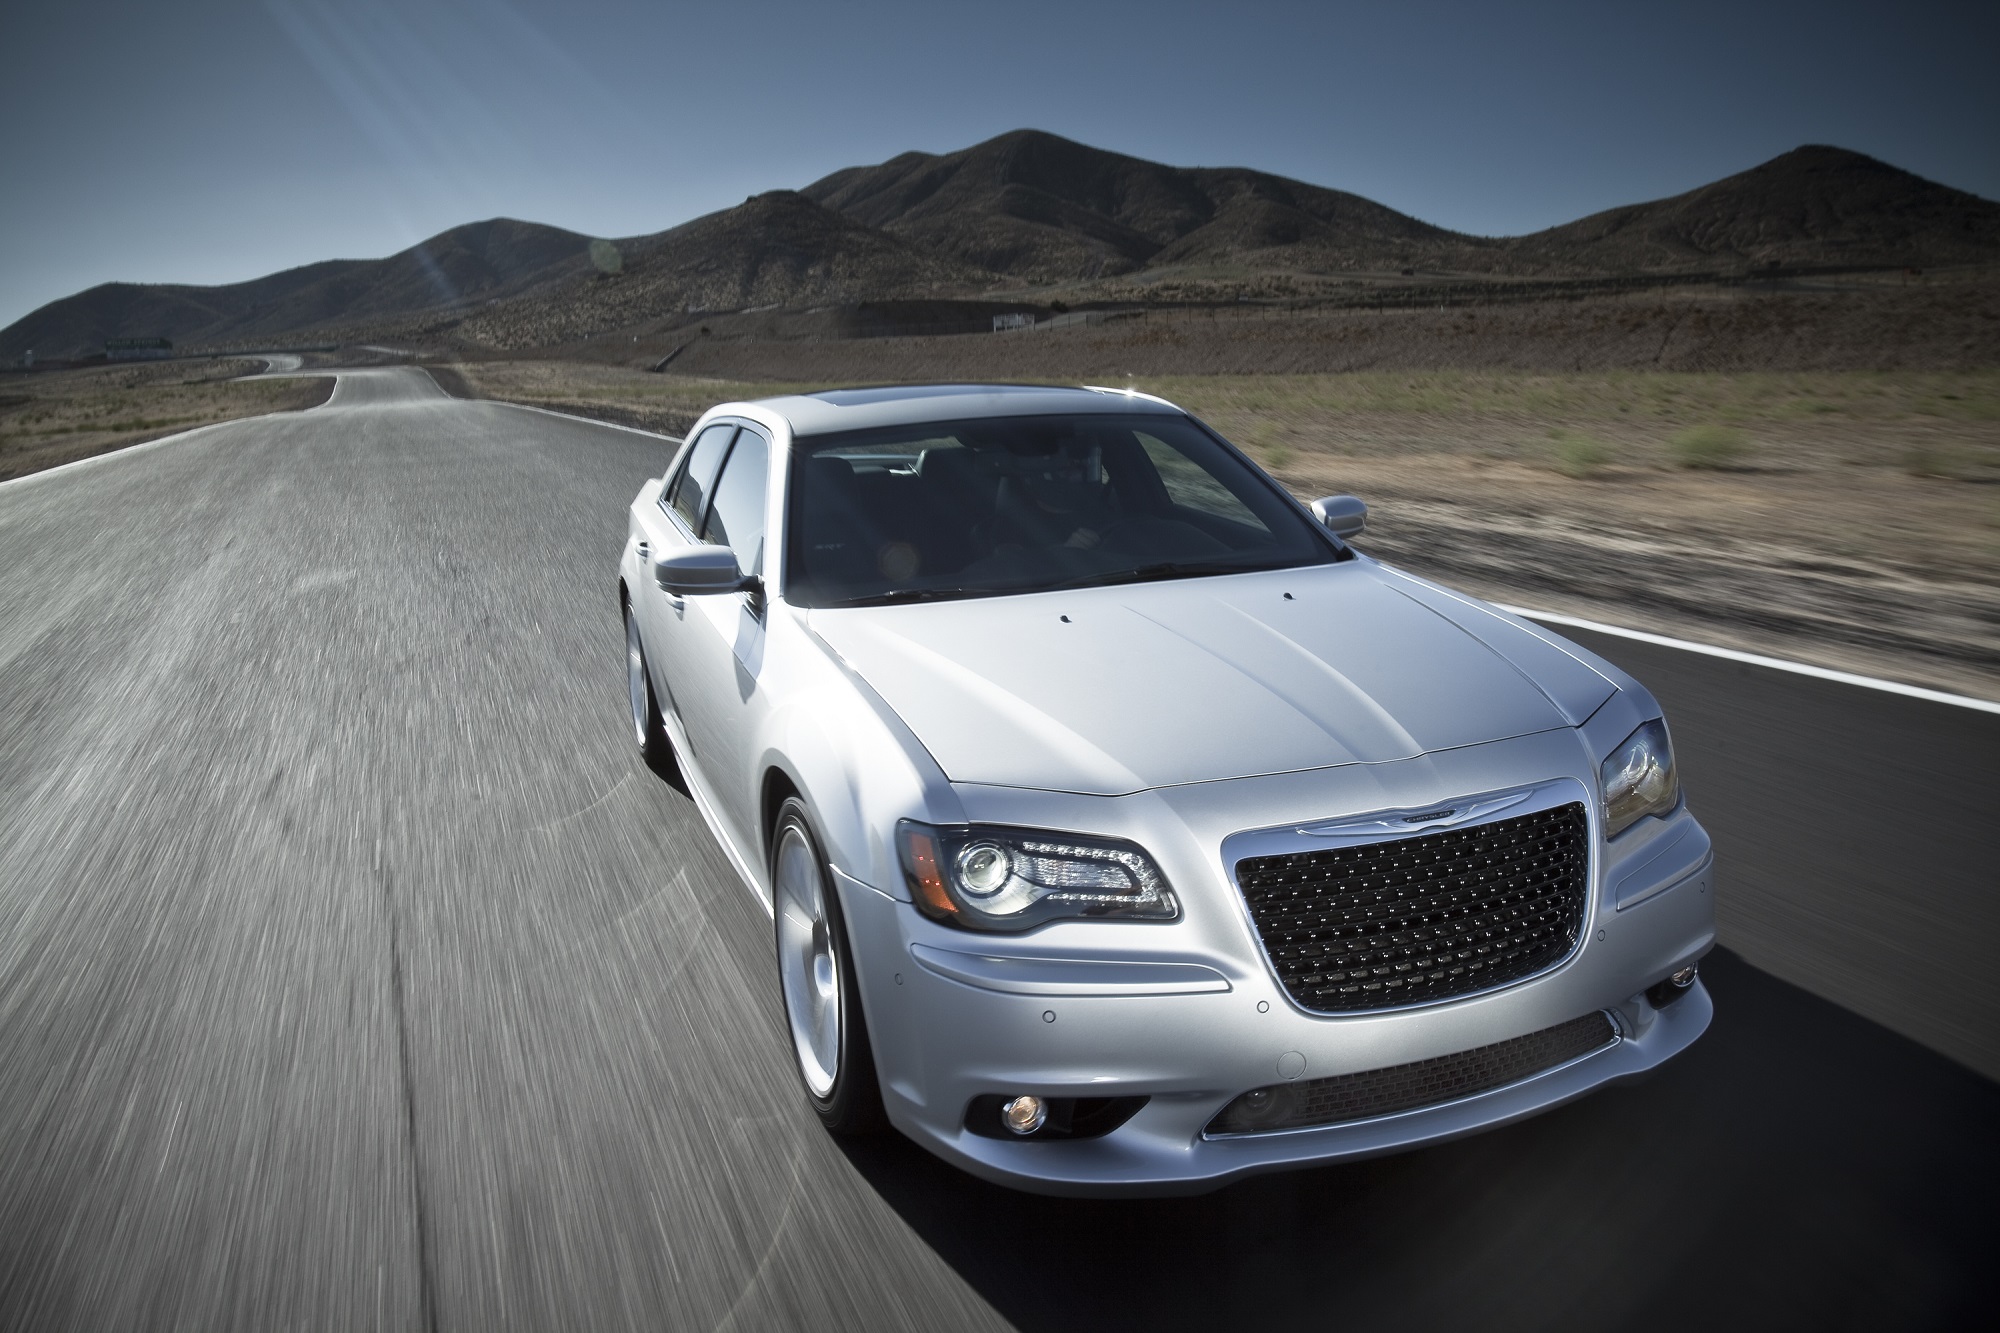 The 2014 Chrysler 300 SRT8 is the last sleeper sedan of its kind with a 6.4L V8.